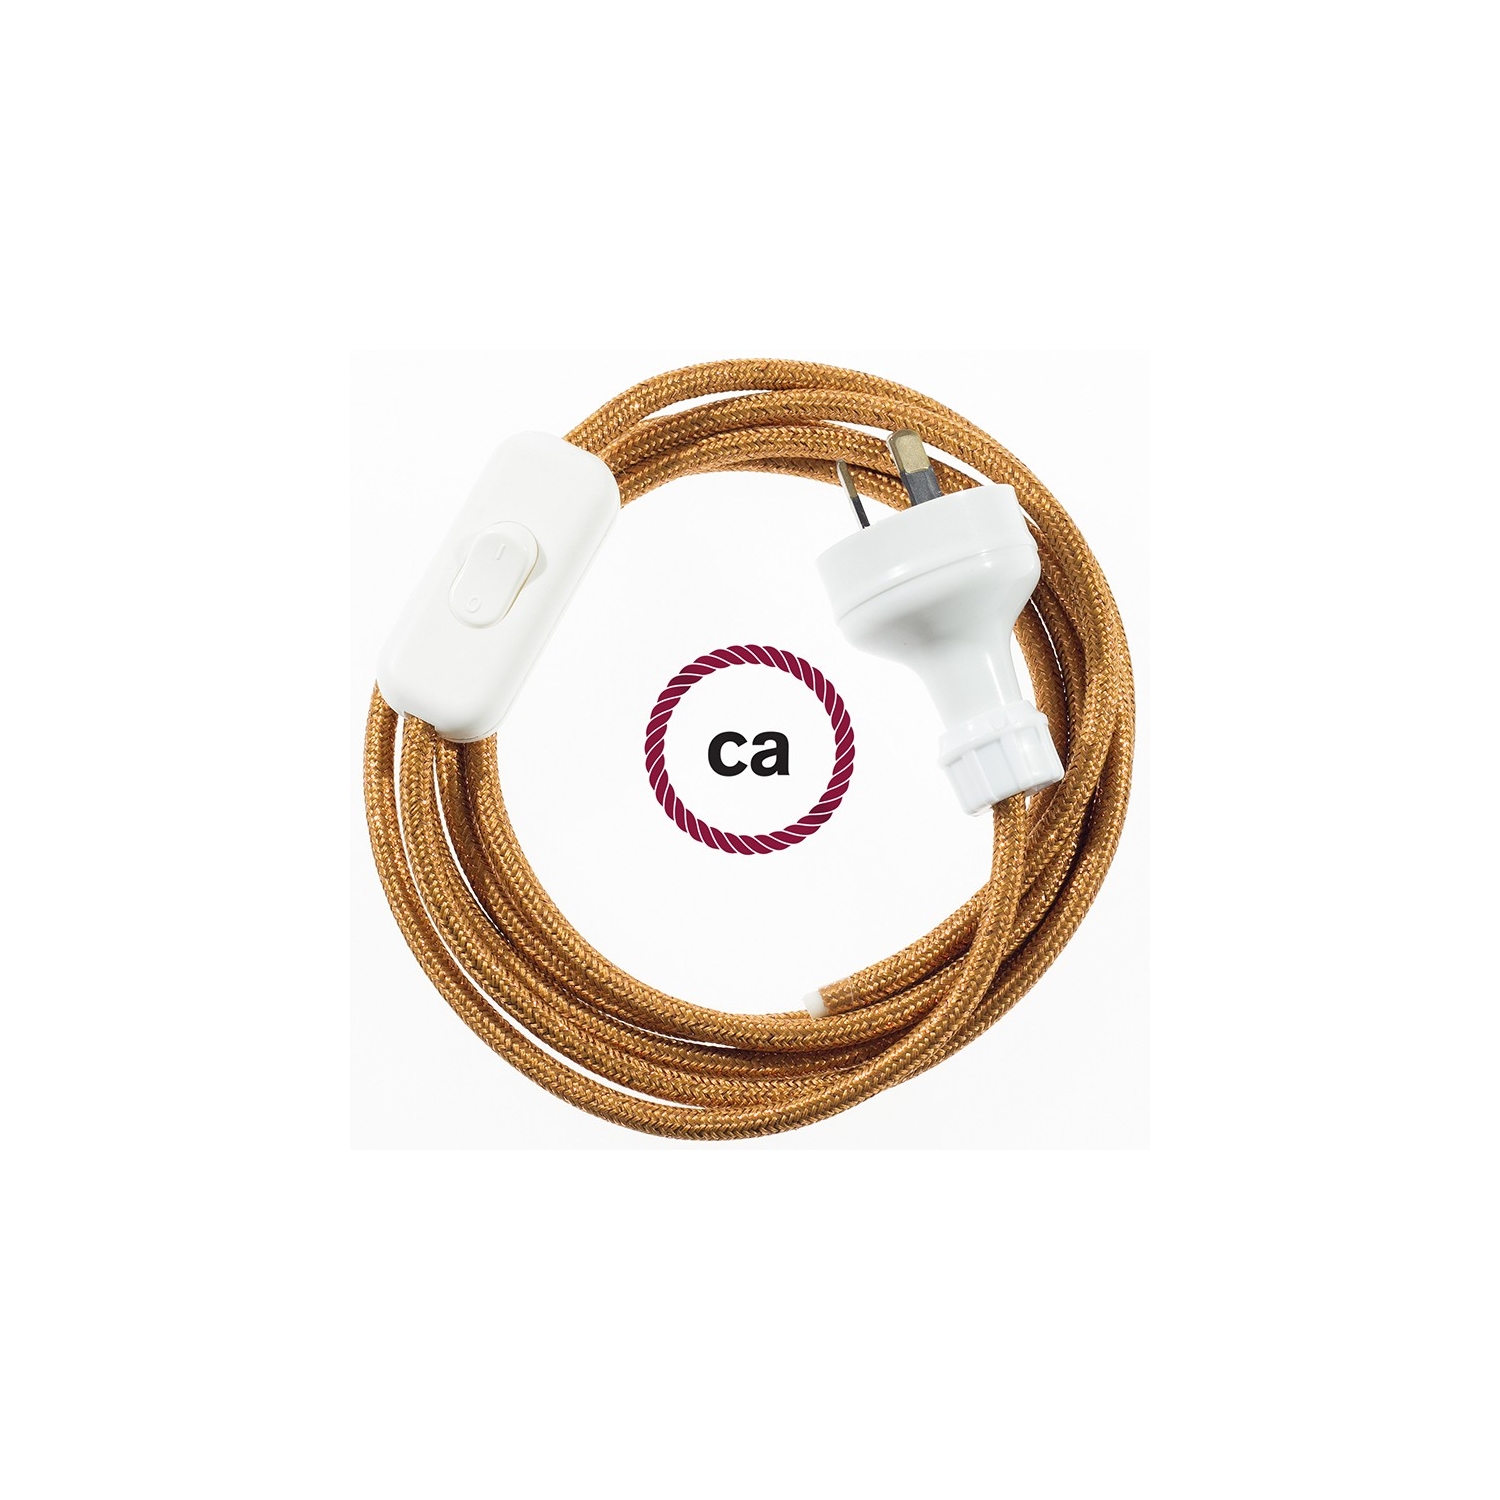 Wiring Glittering Copper textile cable RL22 - 1.80 mt